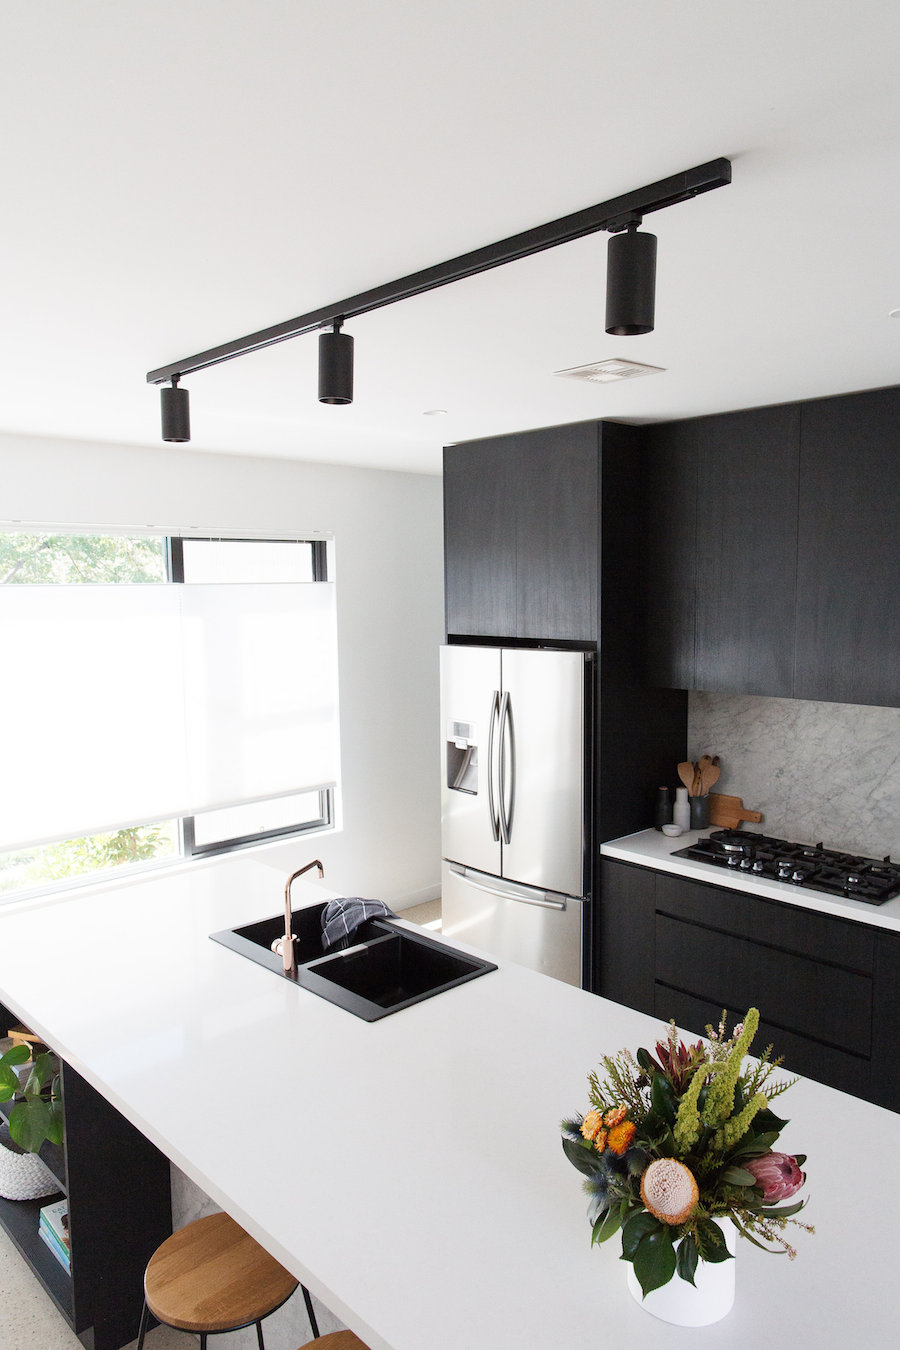 Black track ceiling mount light in the kitchen